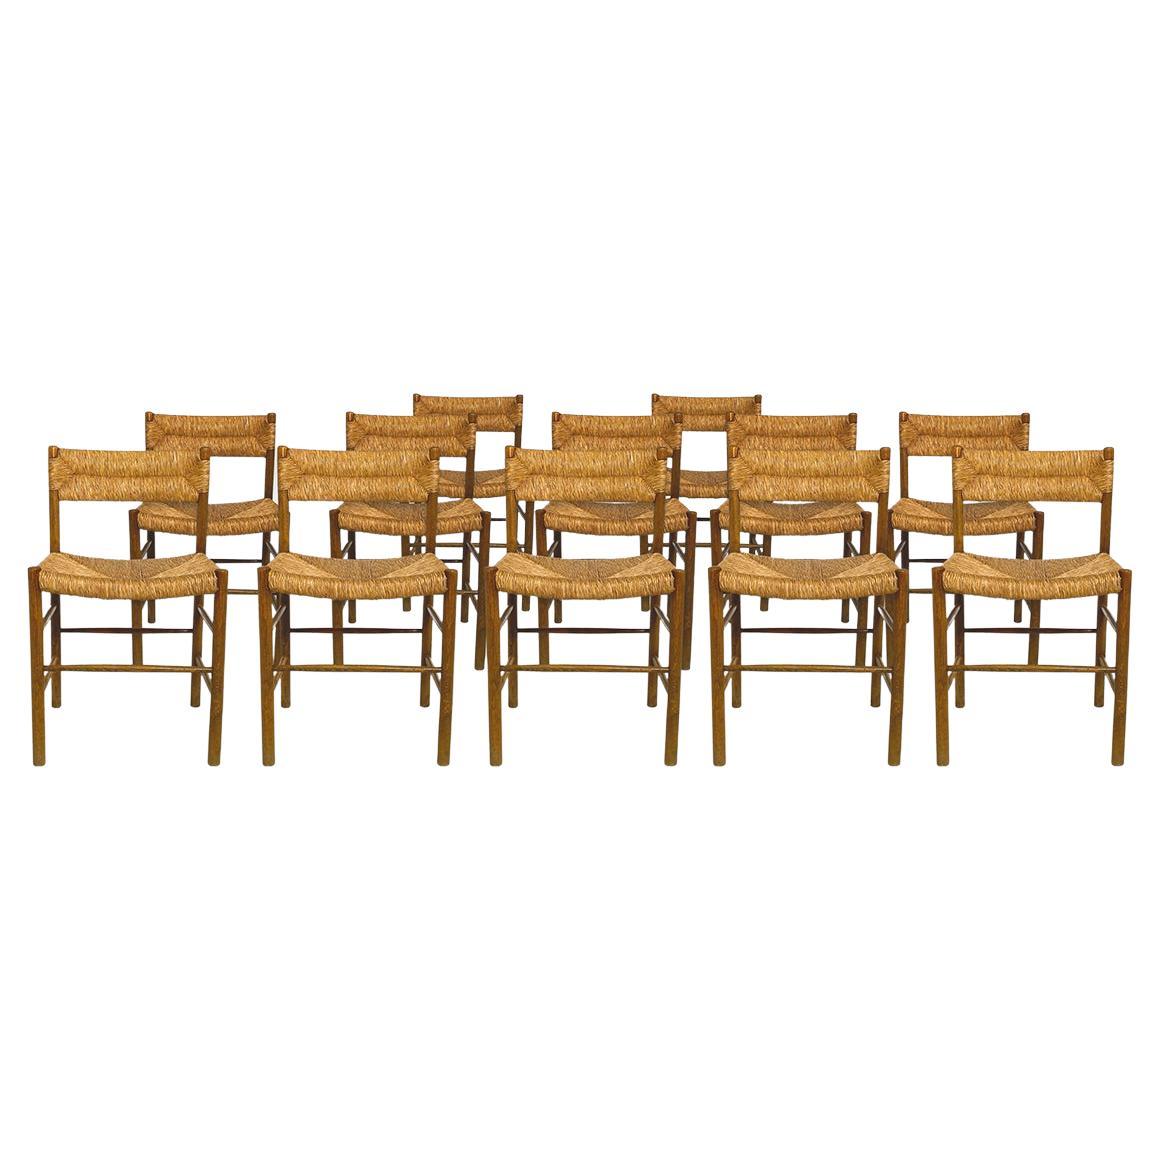 Chairs by Charlotte Perriand Dordogne,  Robert Santou, Set of 12